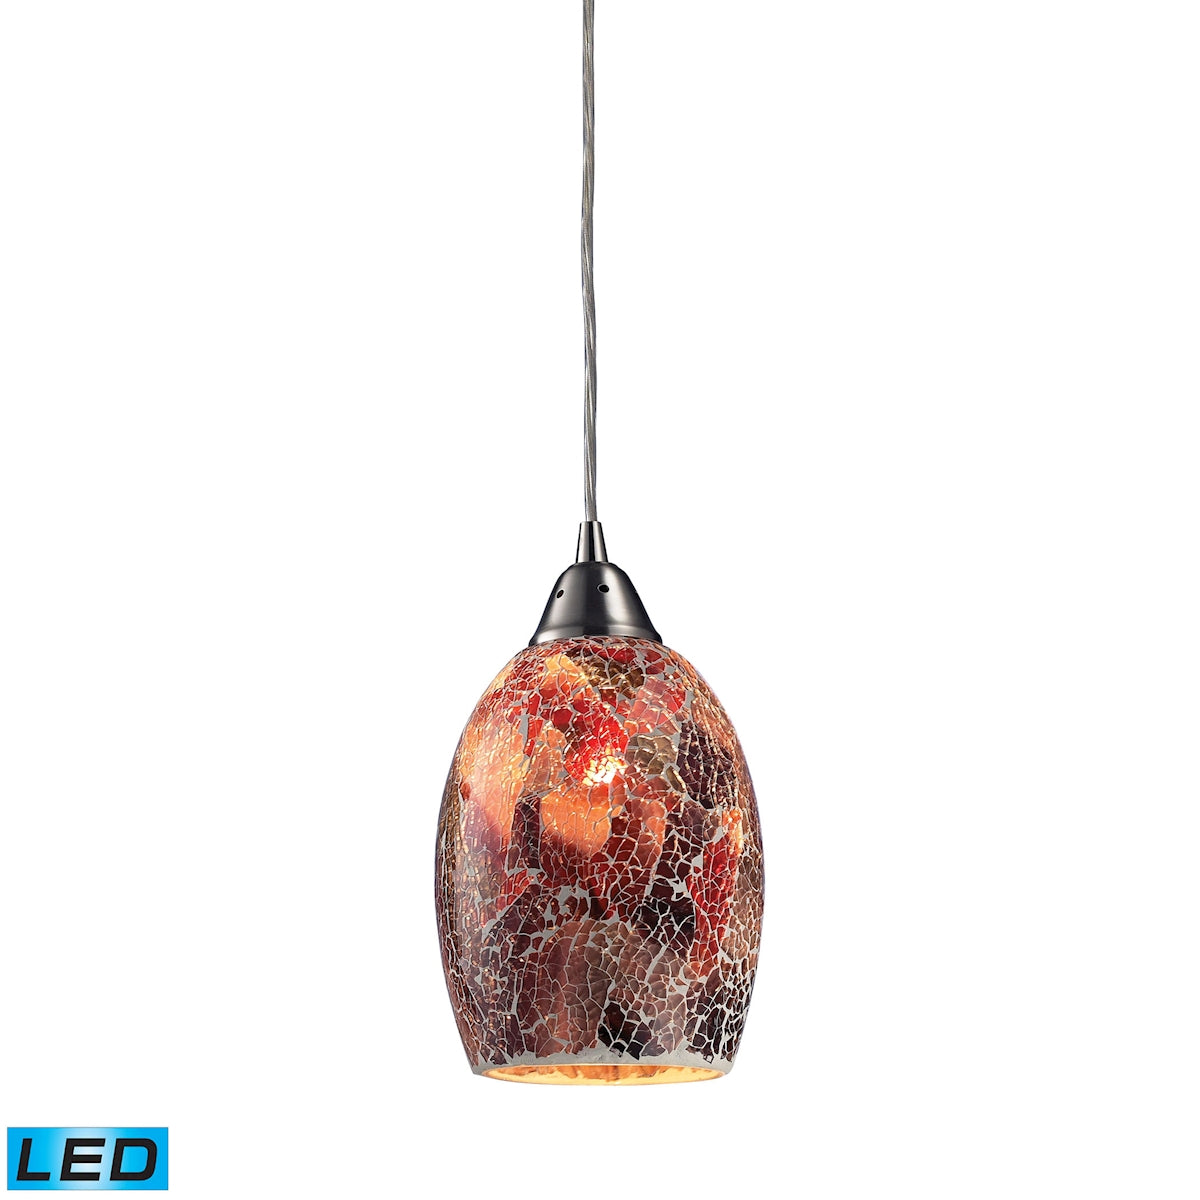 ELK Lighting 73031-1-LED Avalon 1-Light Mini Pendant in Satin Nickel with Multi-colored Crackle Glass - Includes LED Bulb